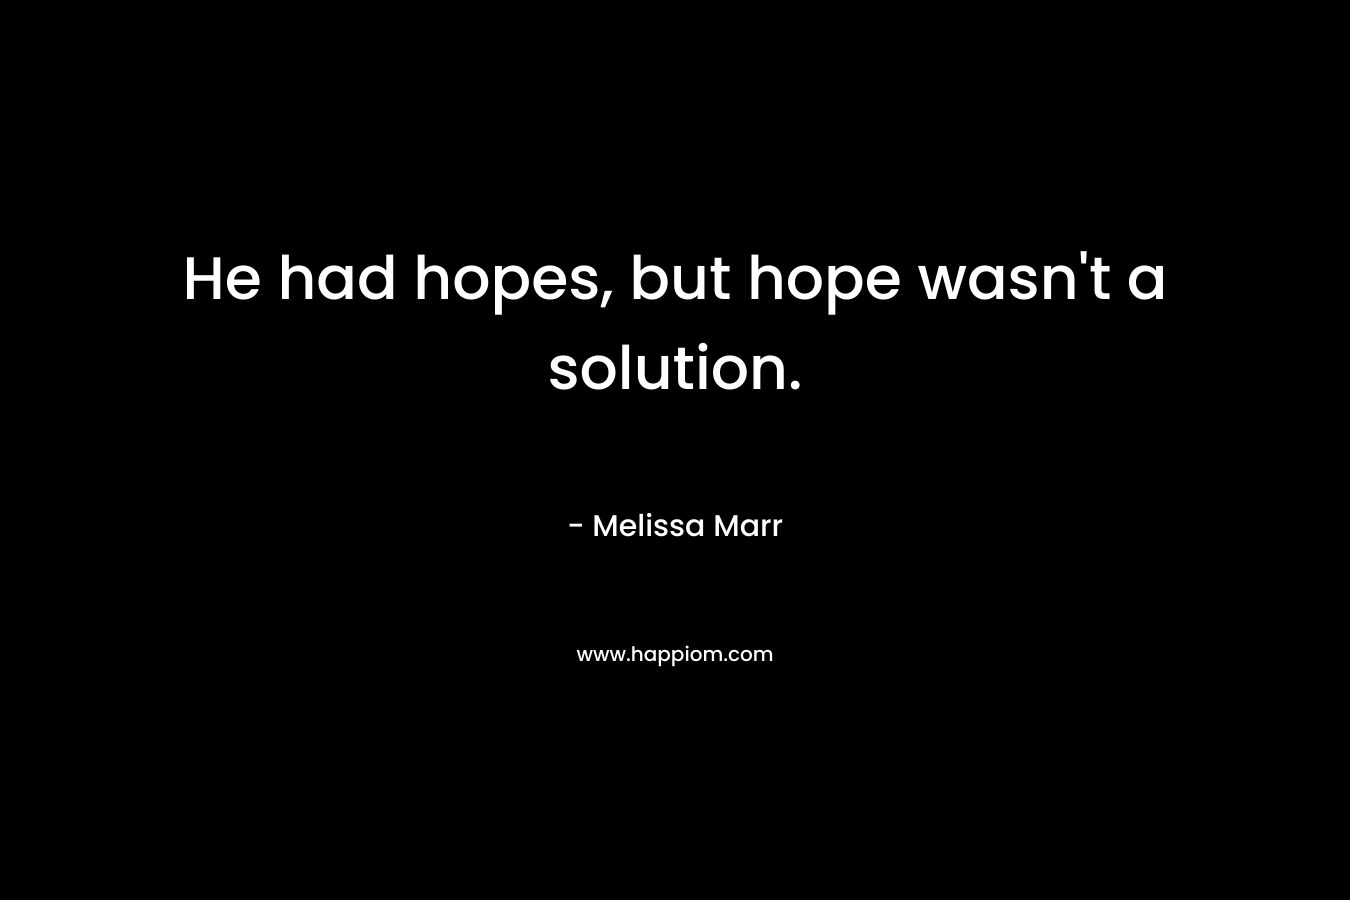 He had hopes, but hope wasn’t a solution. – Melissa Marr